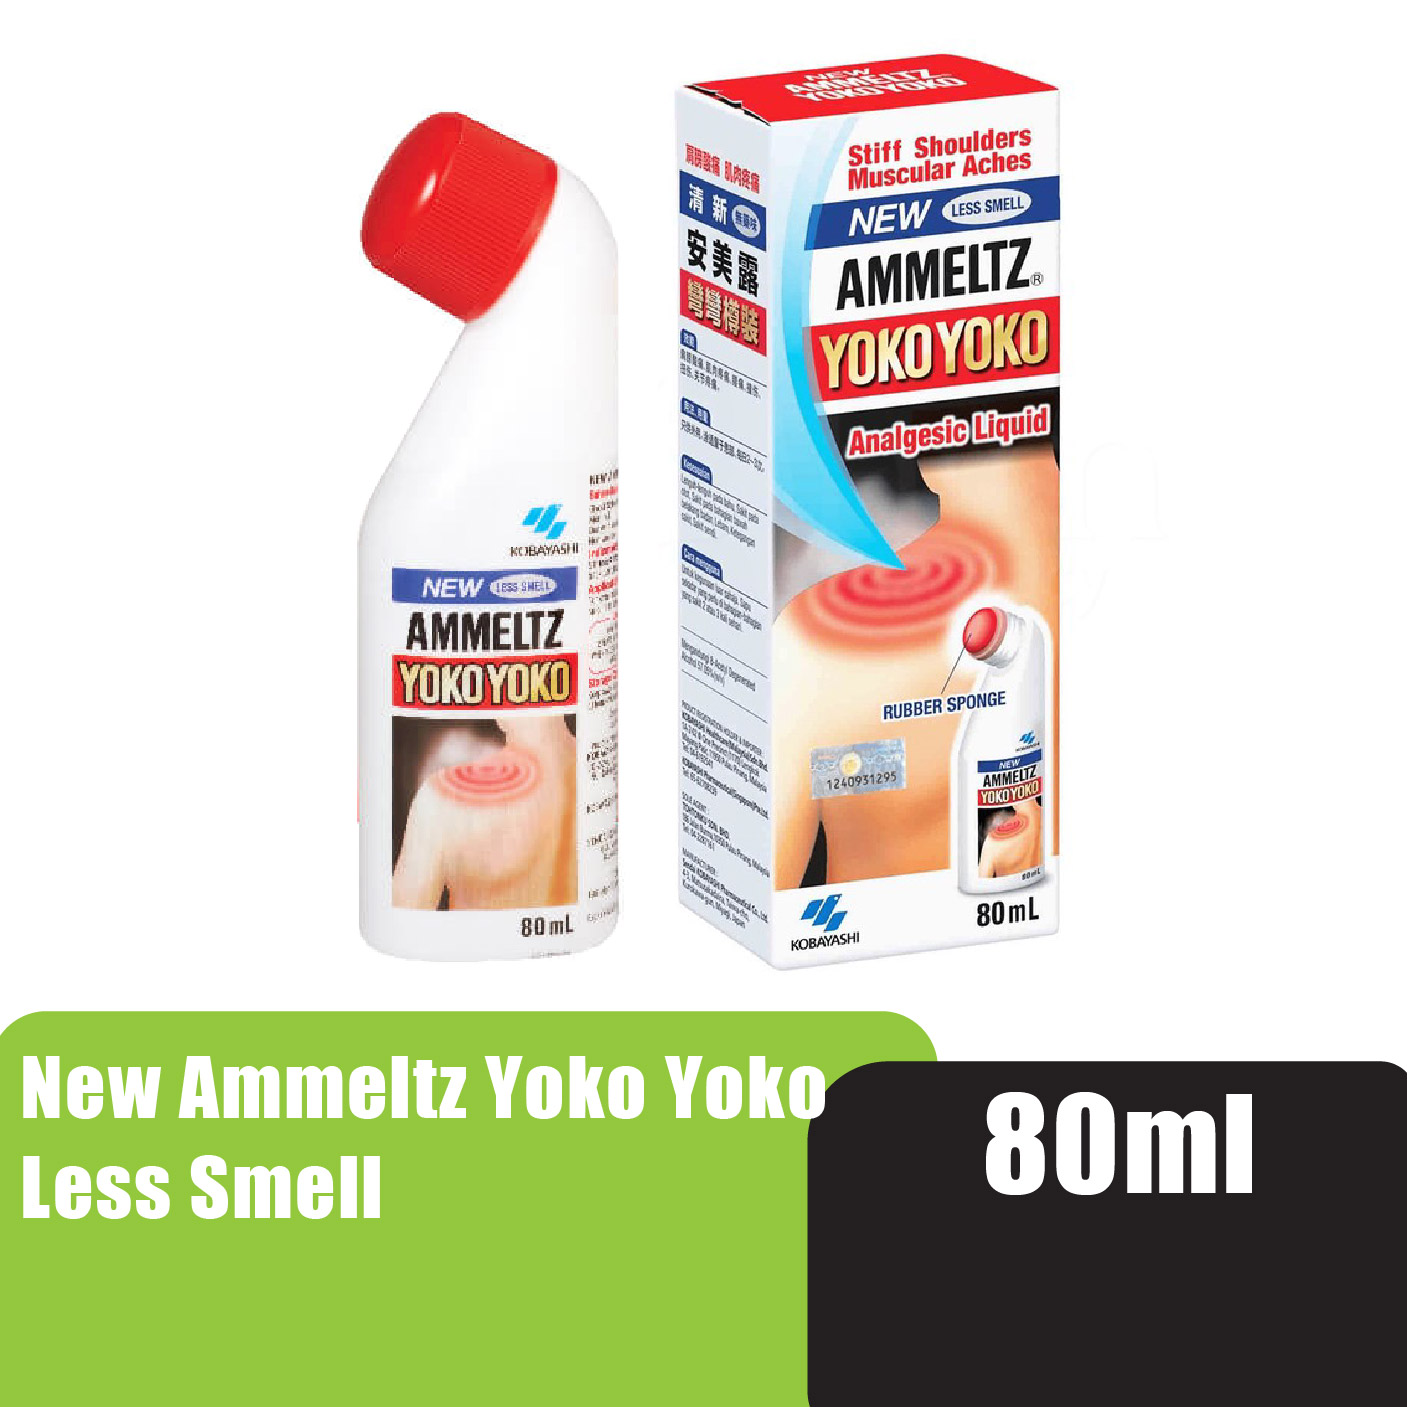 AMMELTZ YokoYoko Muscle Pain Relief 80ml (Less Smell) - For Neck and Shoulder Pain / Muscle Pain Relief 安美露